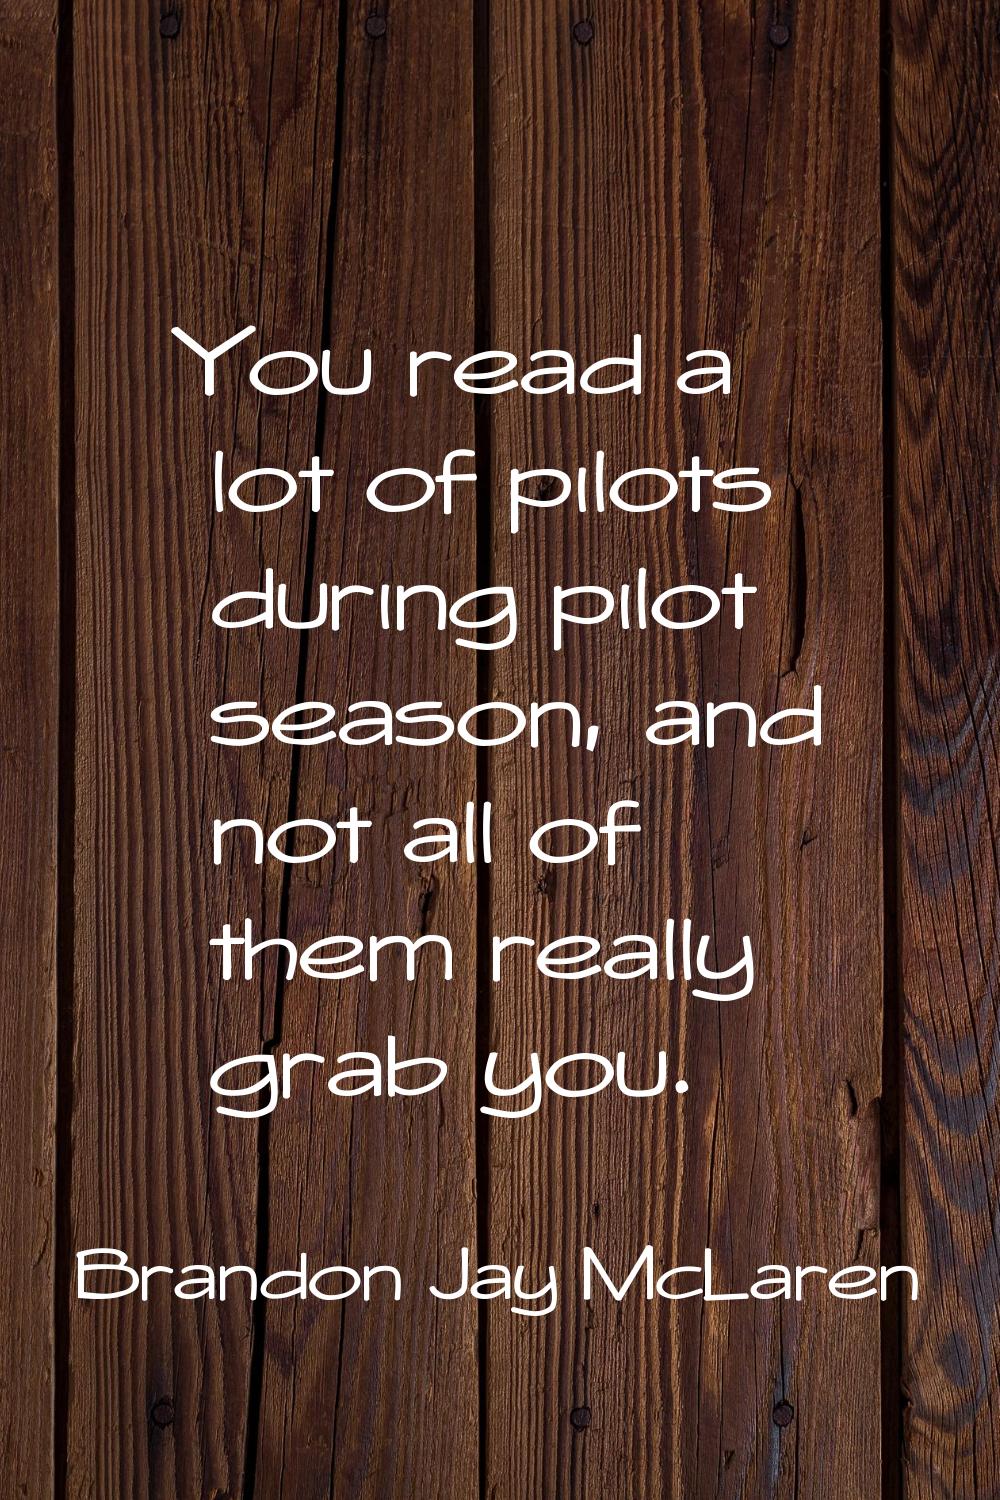 You read a lot of pilots during pilot season, and not all of them really grab you.